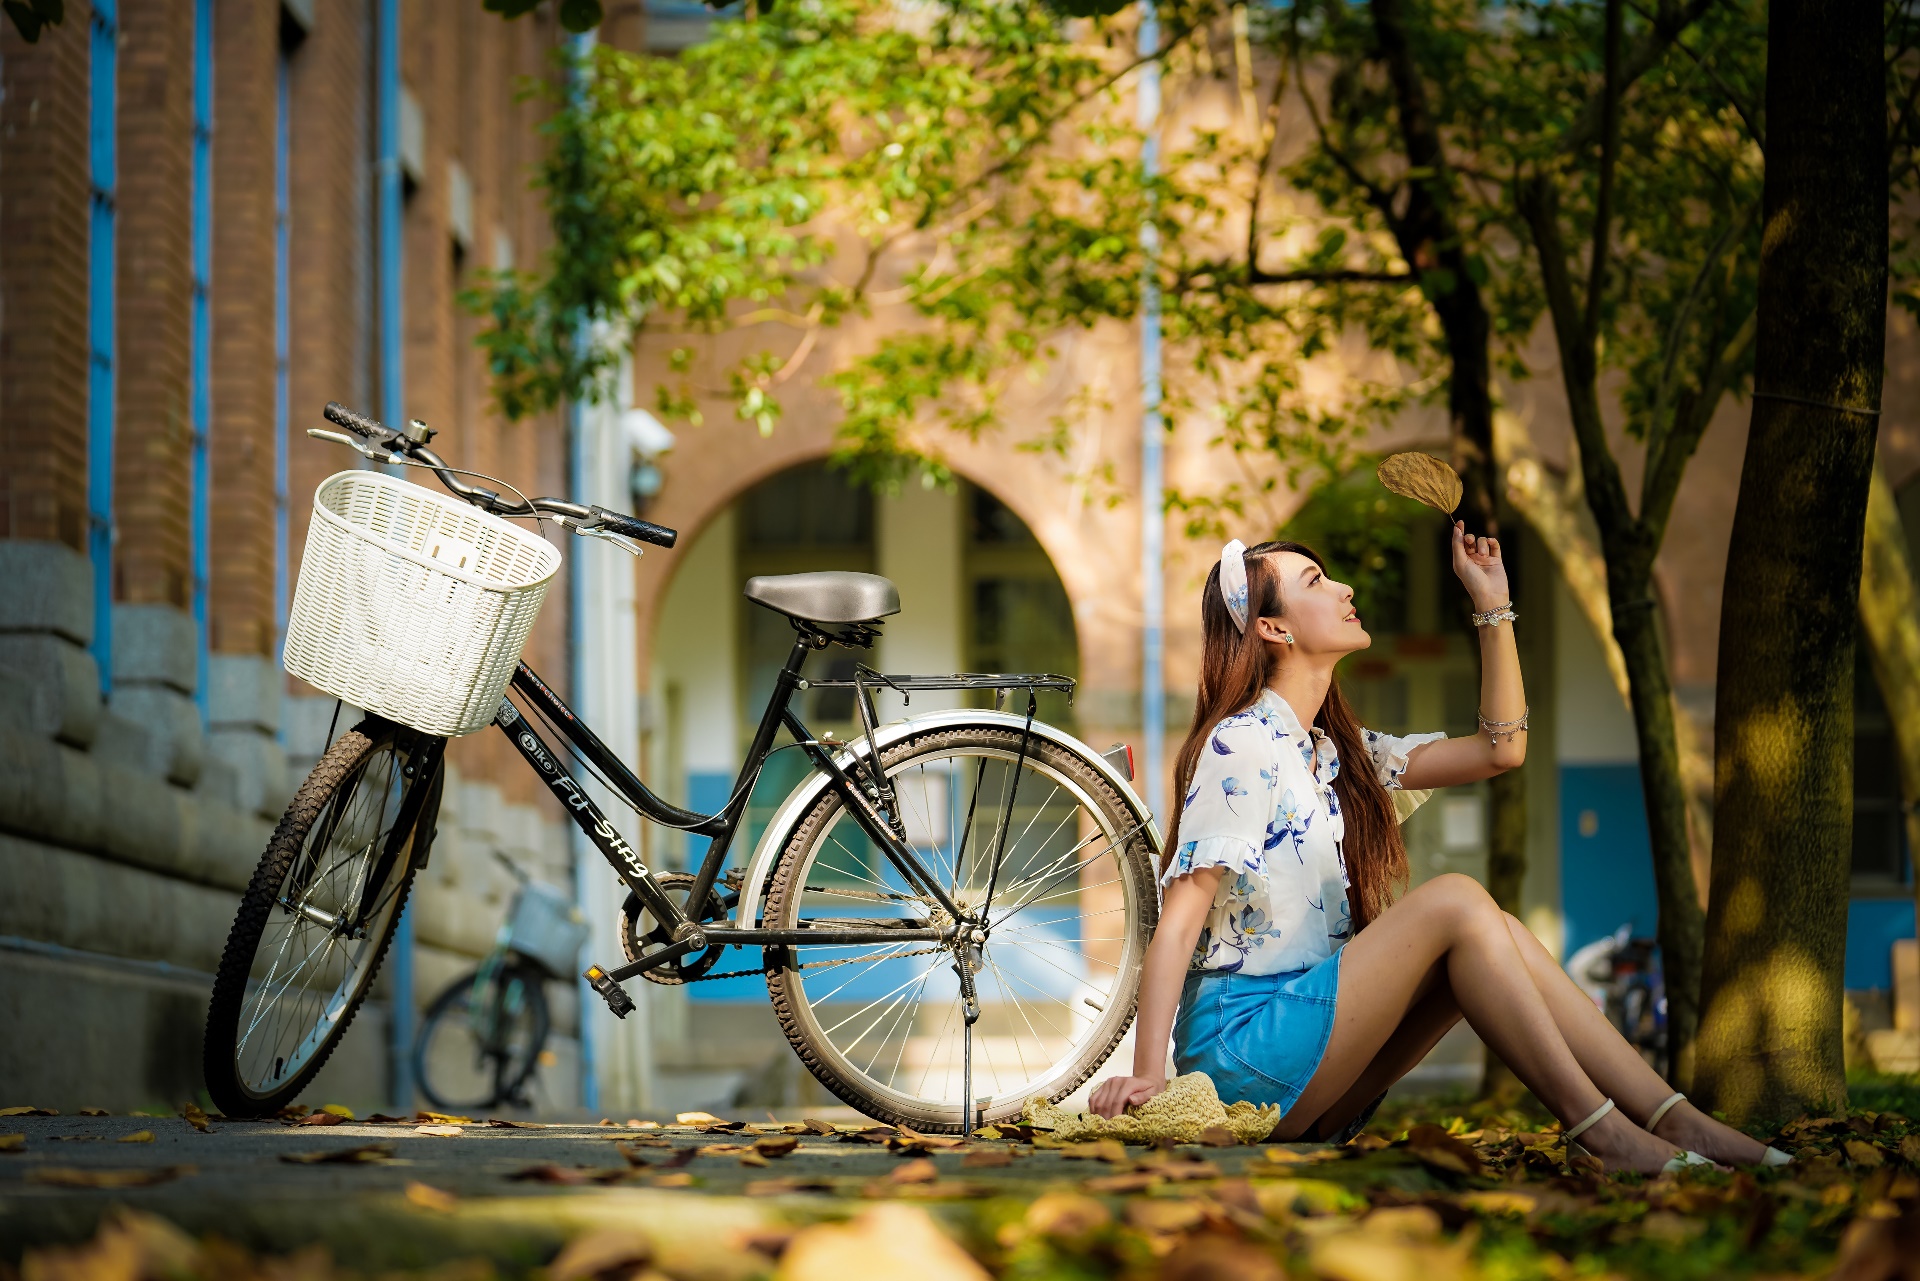 People 1920x1281 vehicle bicycle Asian city sitting women women outdoors women with bicycles